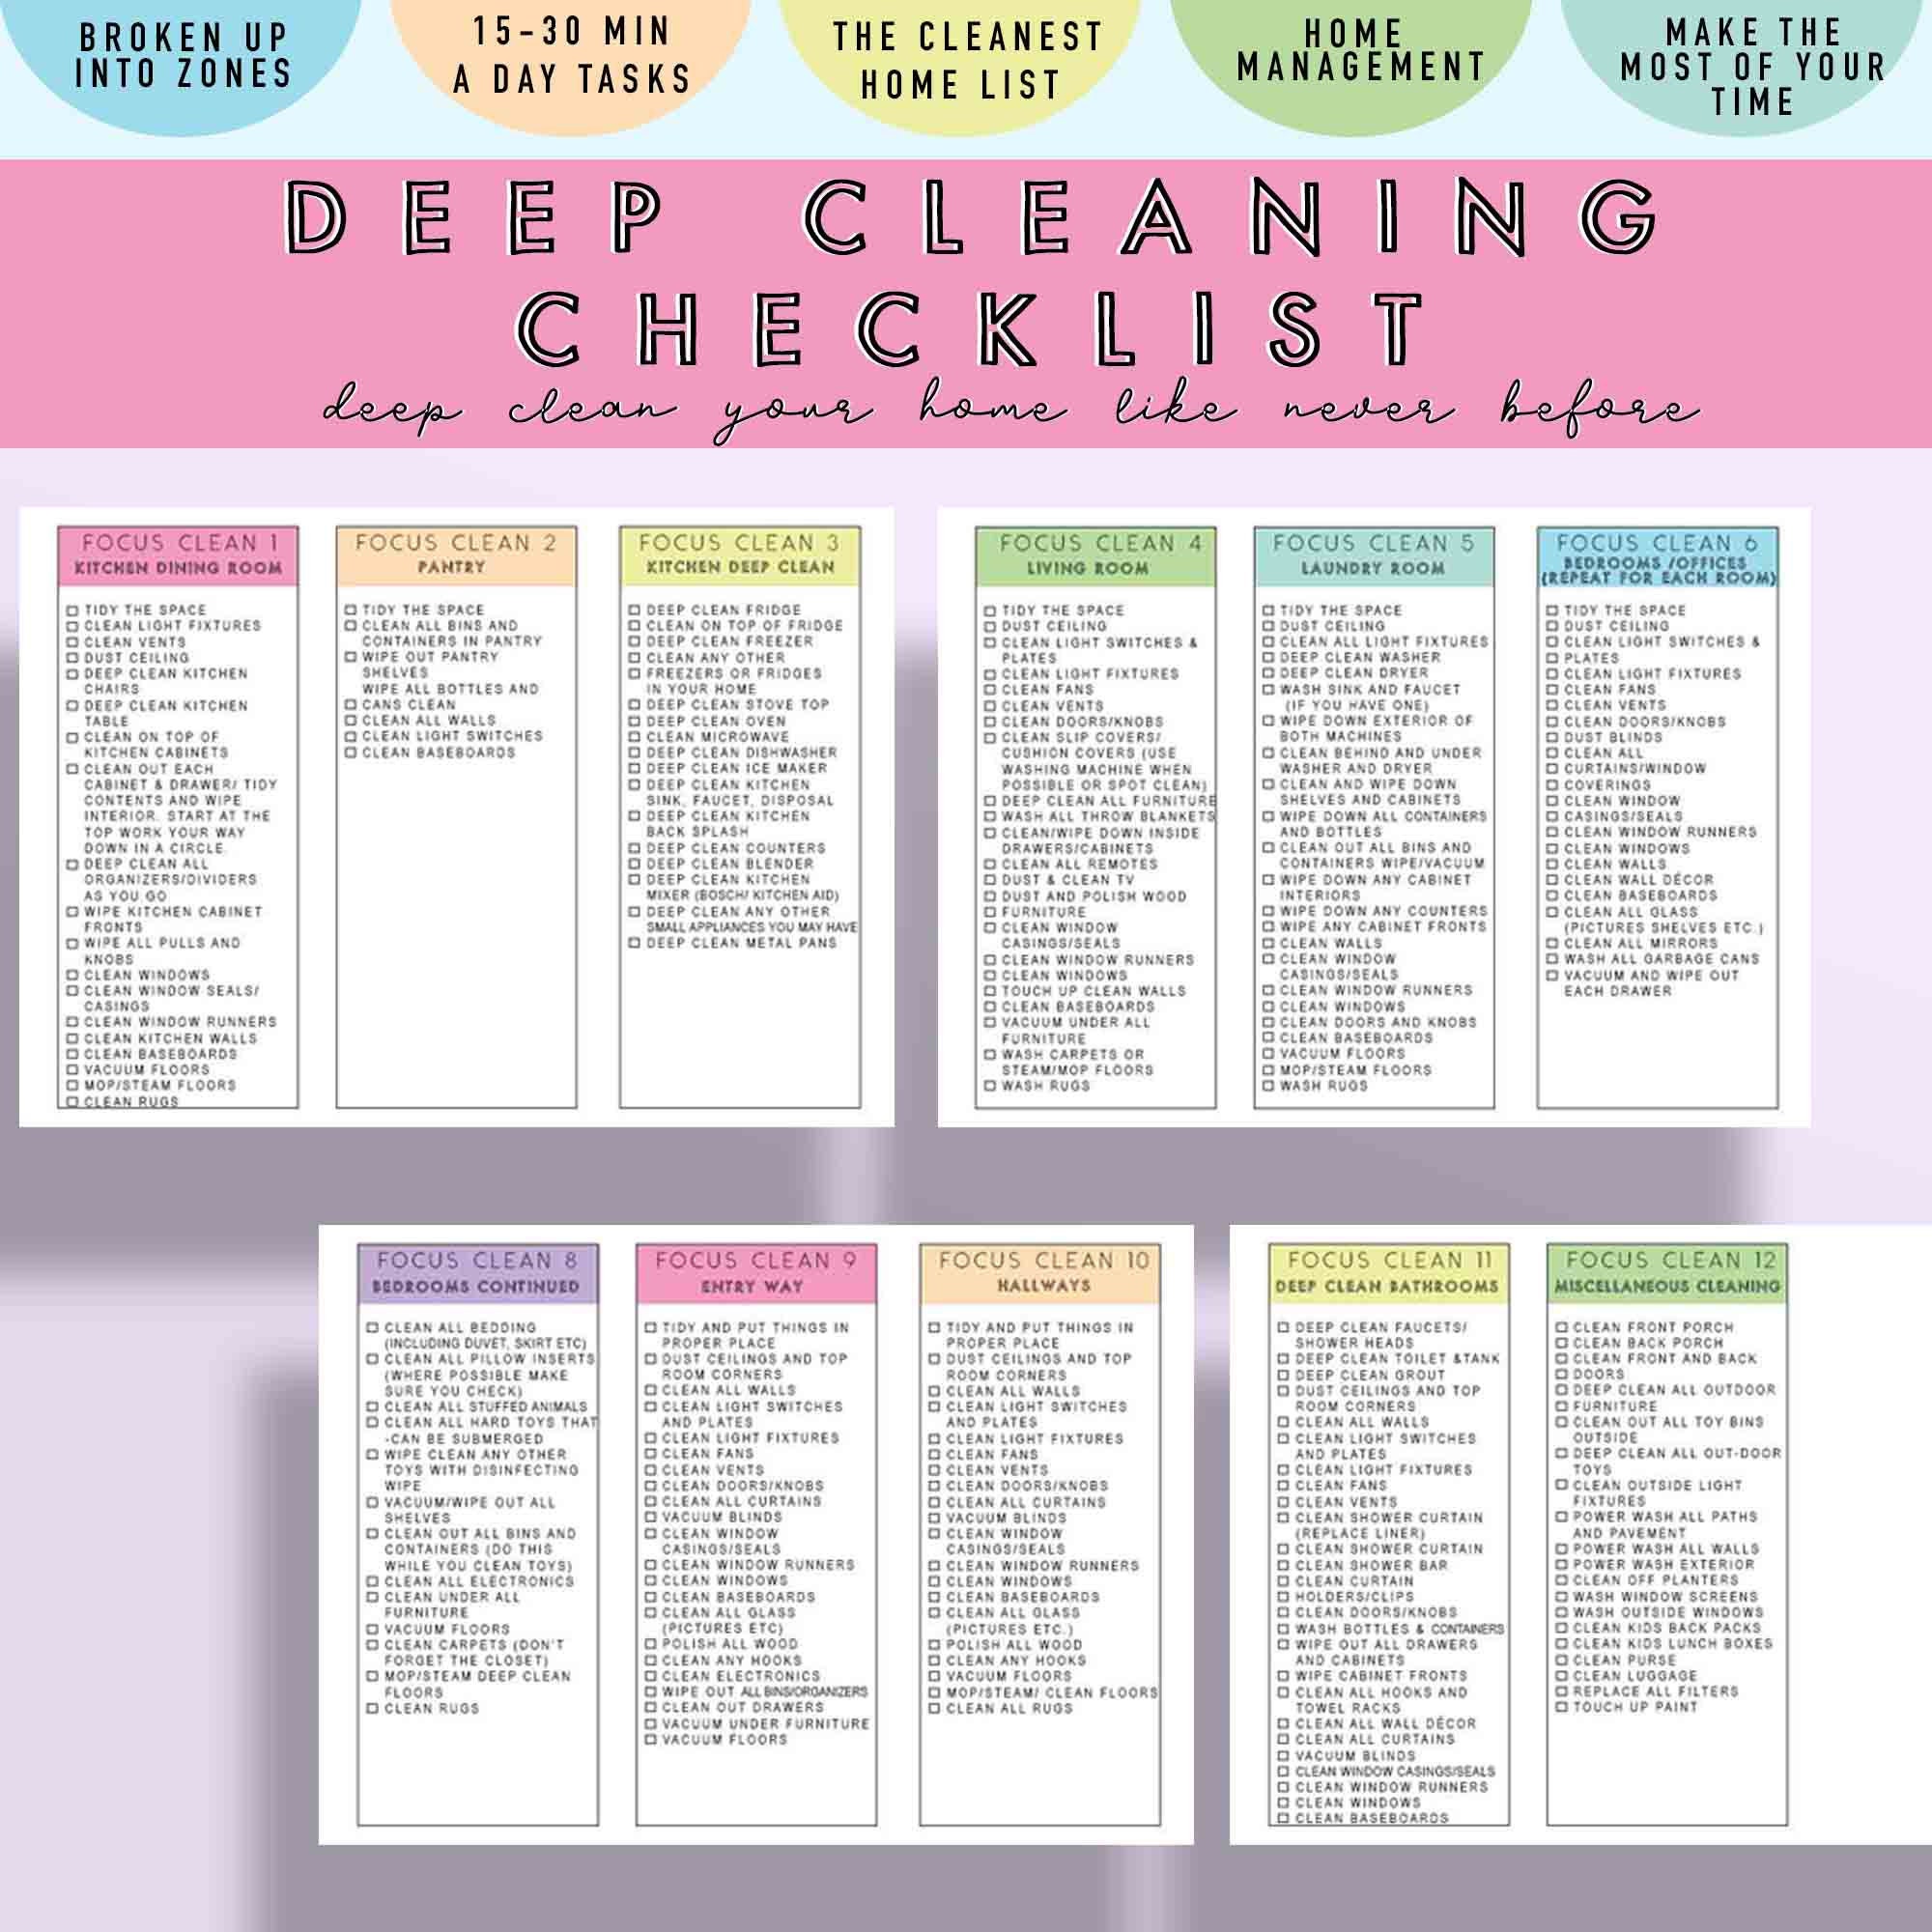 New House? Here's the Ultimate Move-In Cleaning Checklist - Daisy